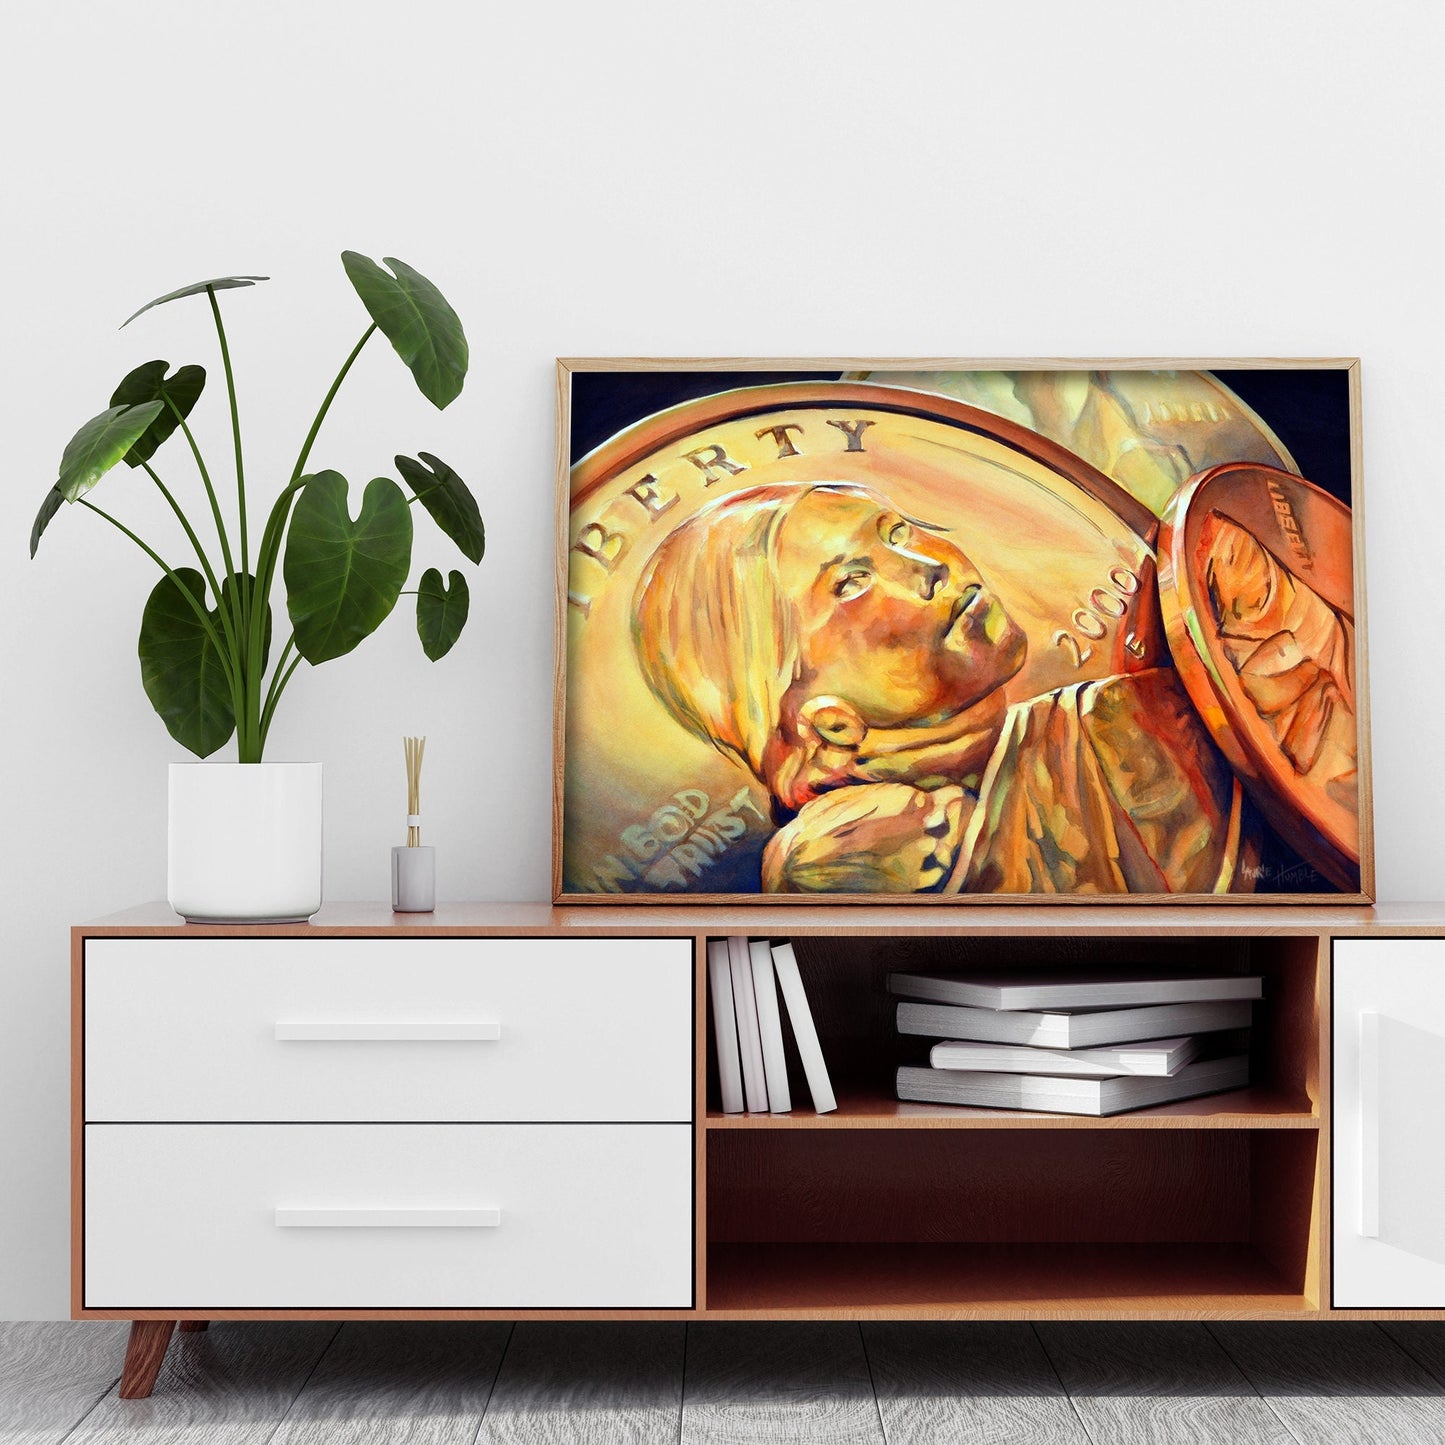 Office Wall Art, Money Painting, Sacagawea Dollar, US Currency, Large Scale Art, Canvas Print